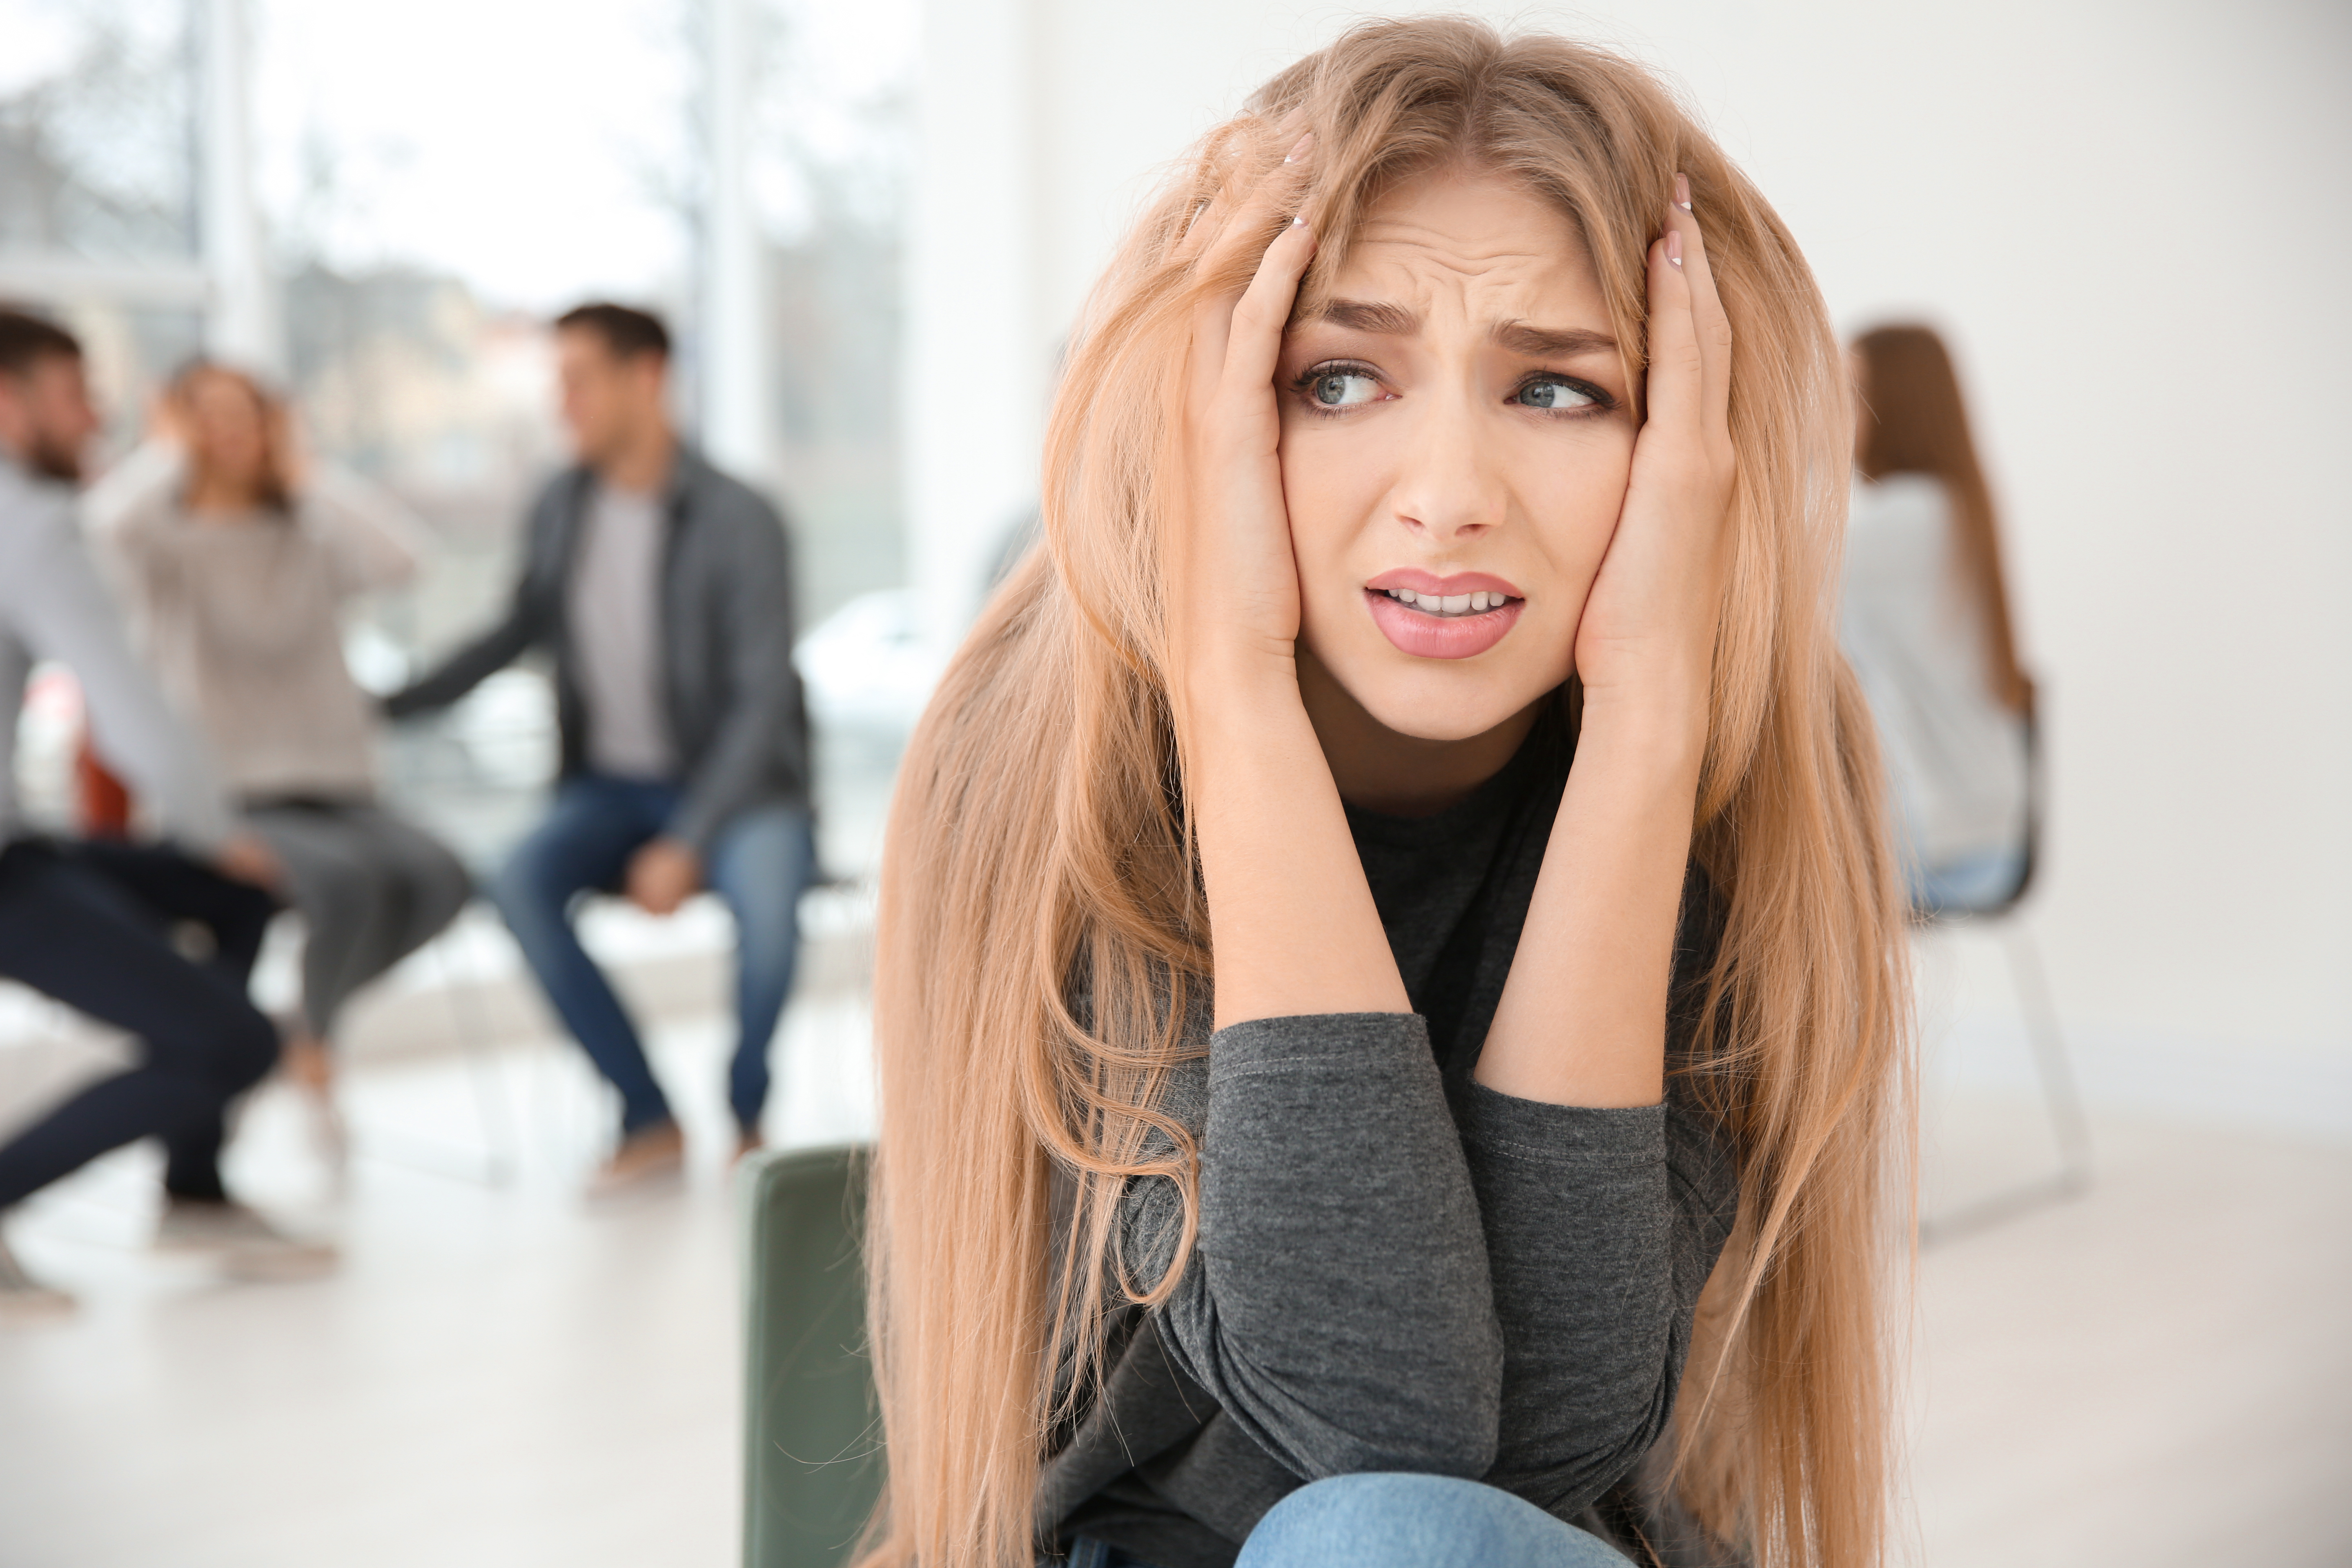 Hypnotherapy for Social Anxiety